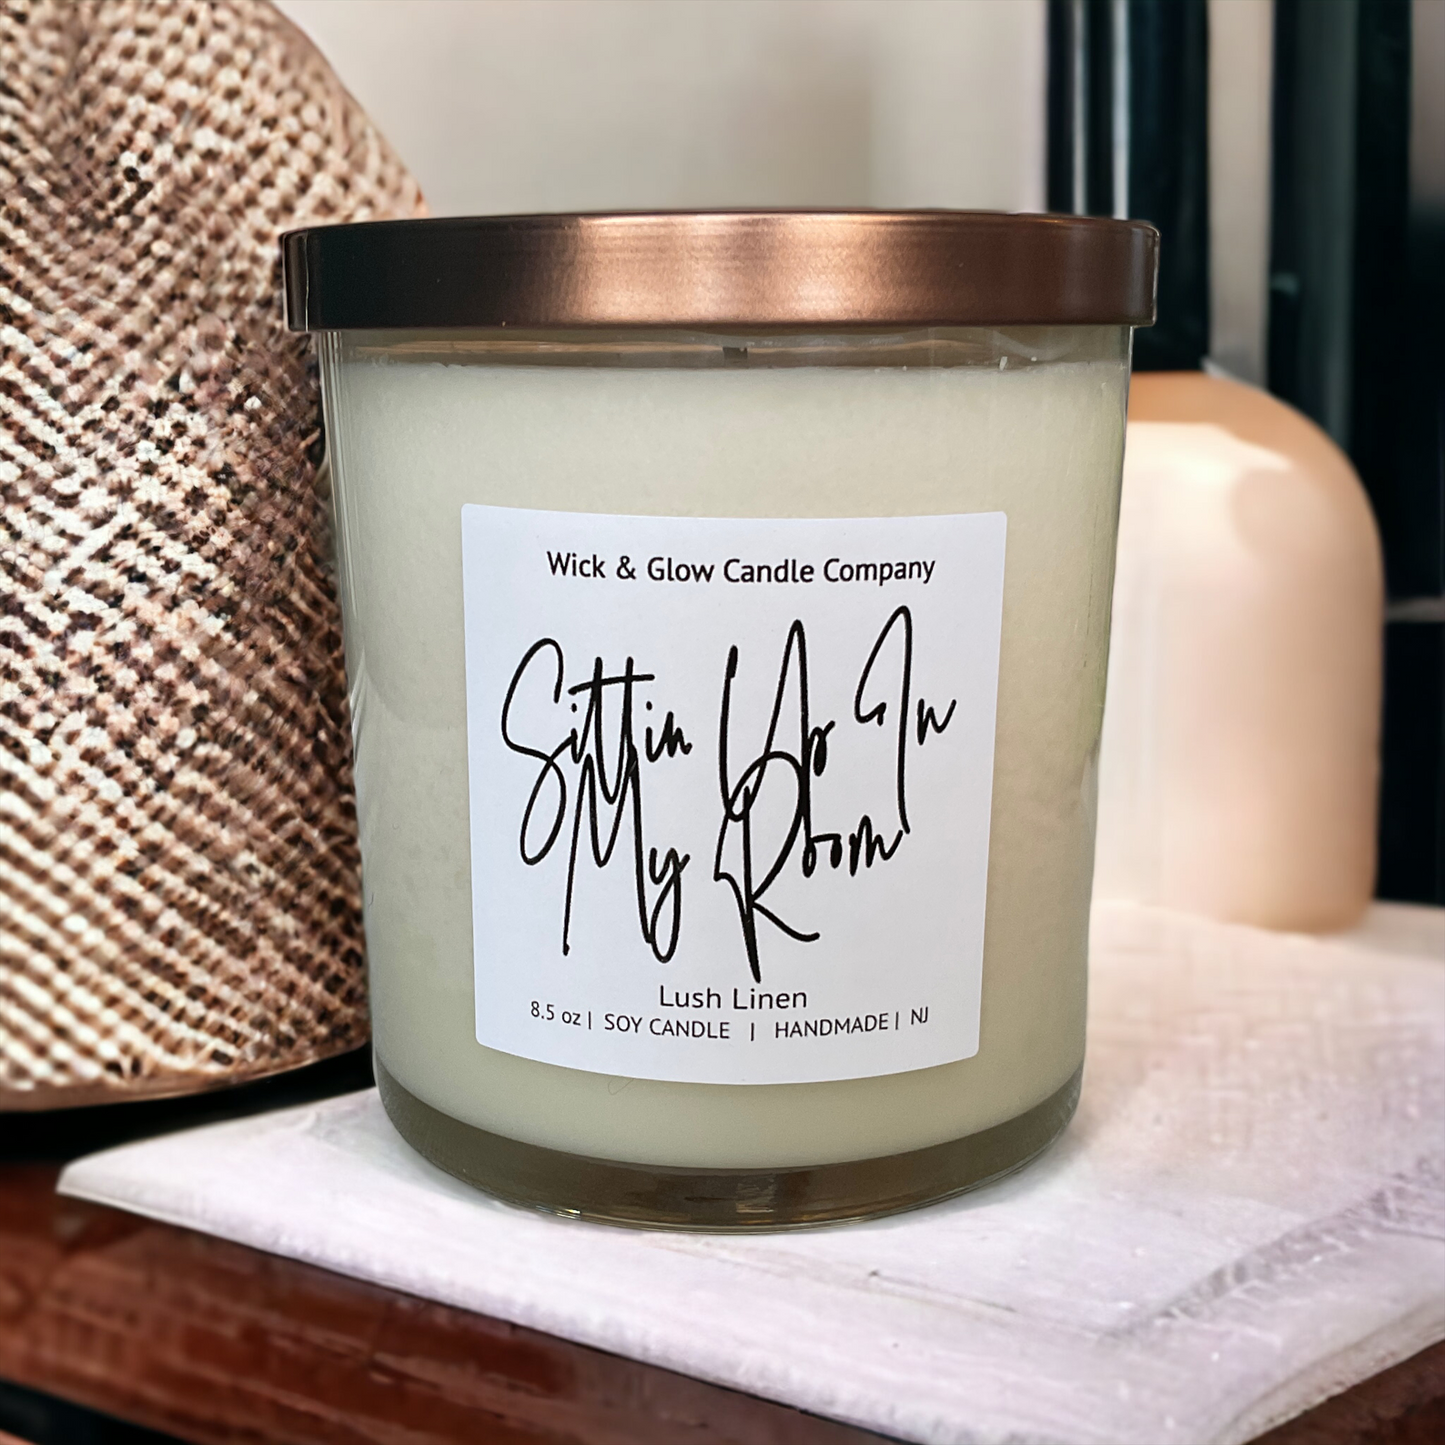 Sittin' Up In My Room : Lush Linen Luxury Scented Candle